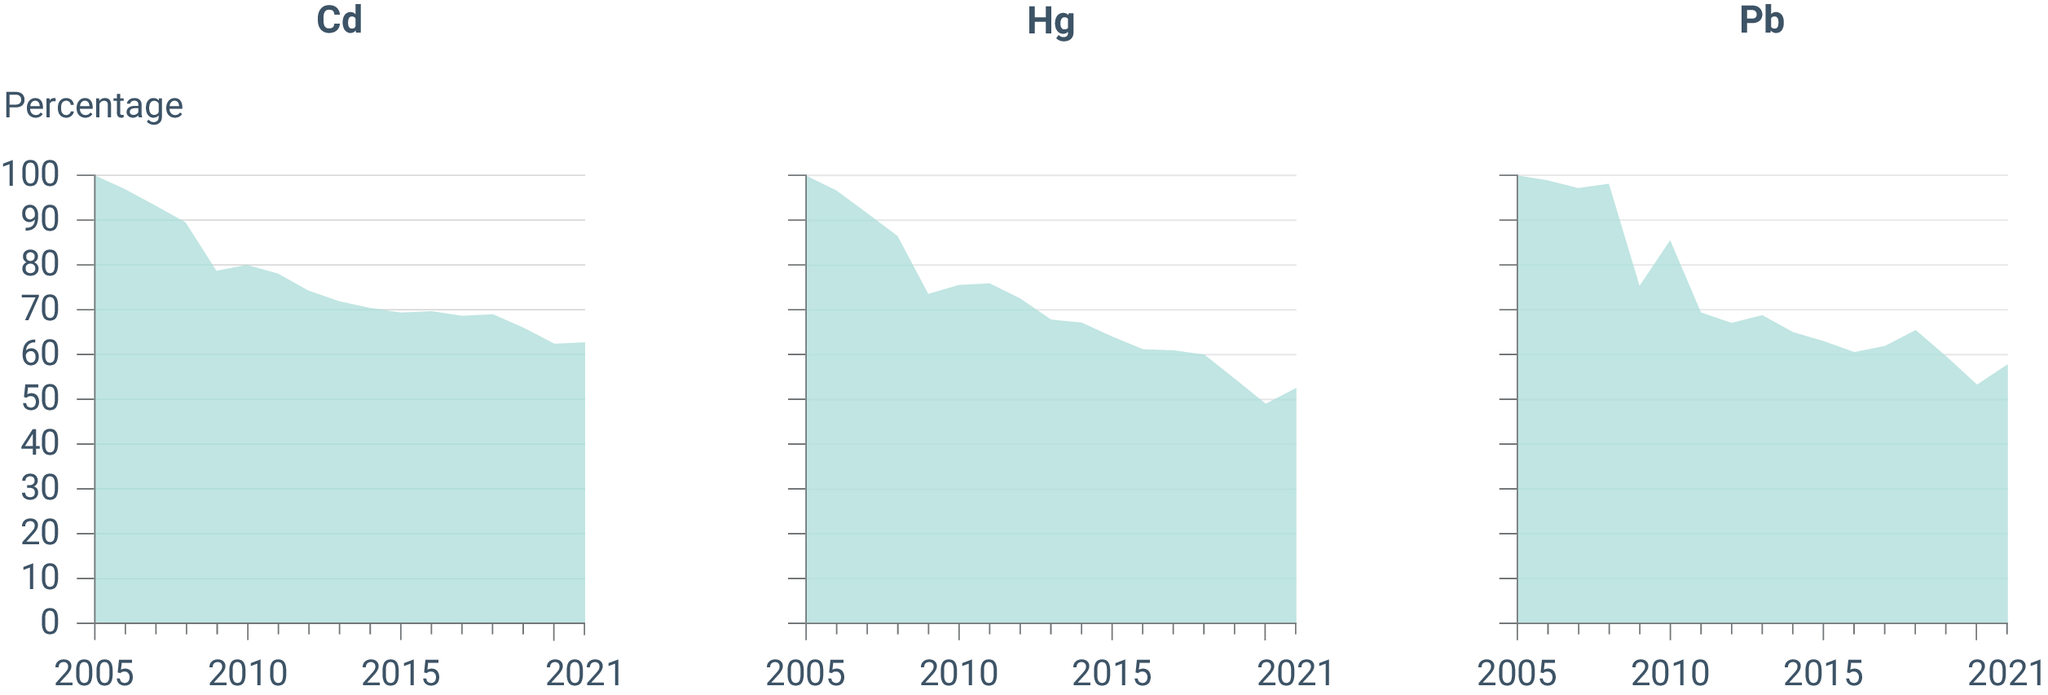 Percentage emission reductions in 2021 of primary heavy metals compared with 2005 levels